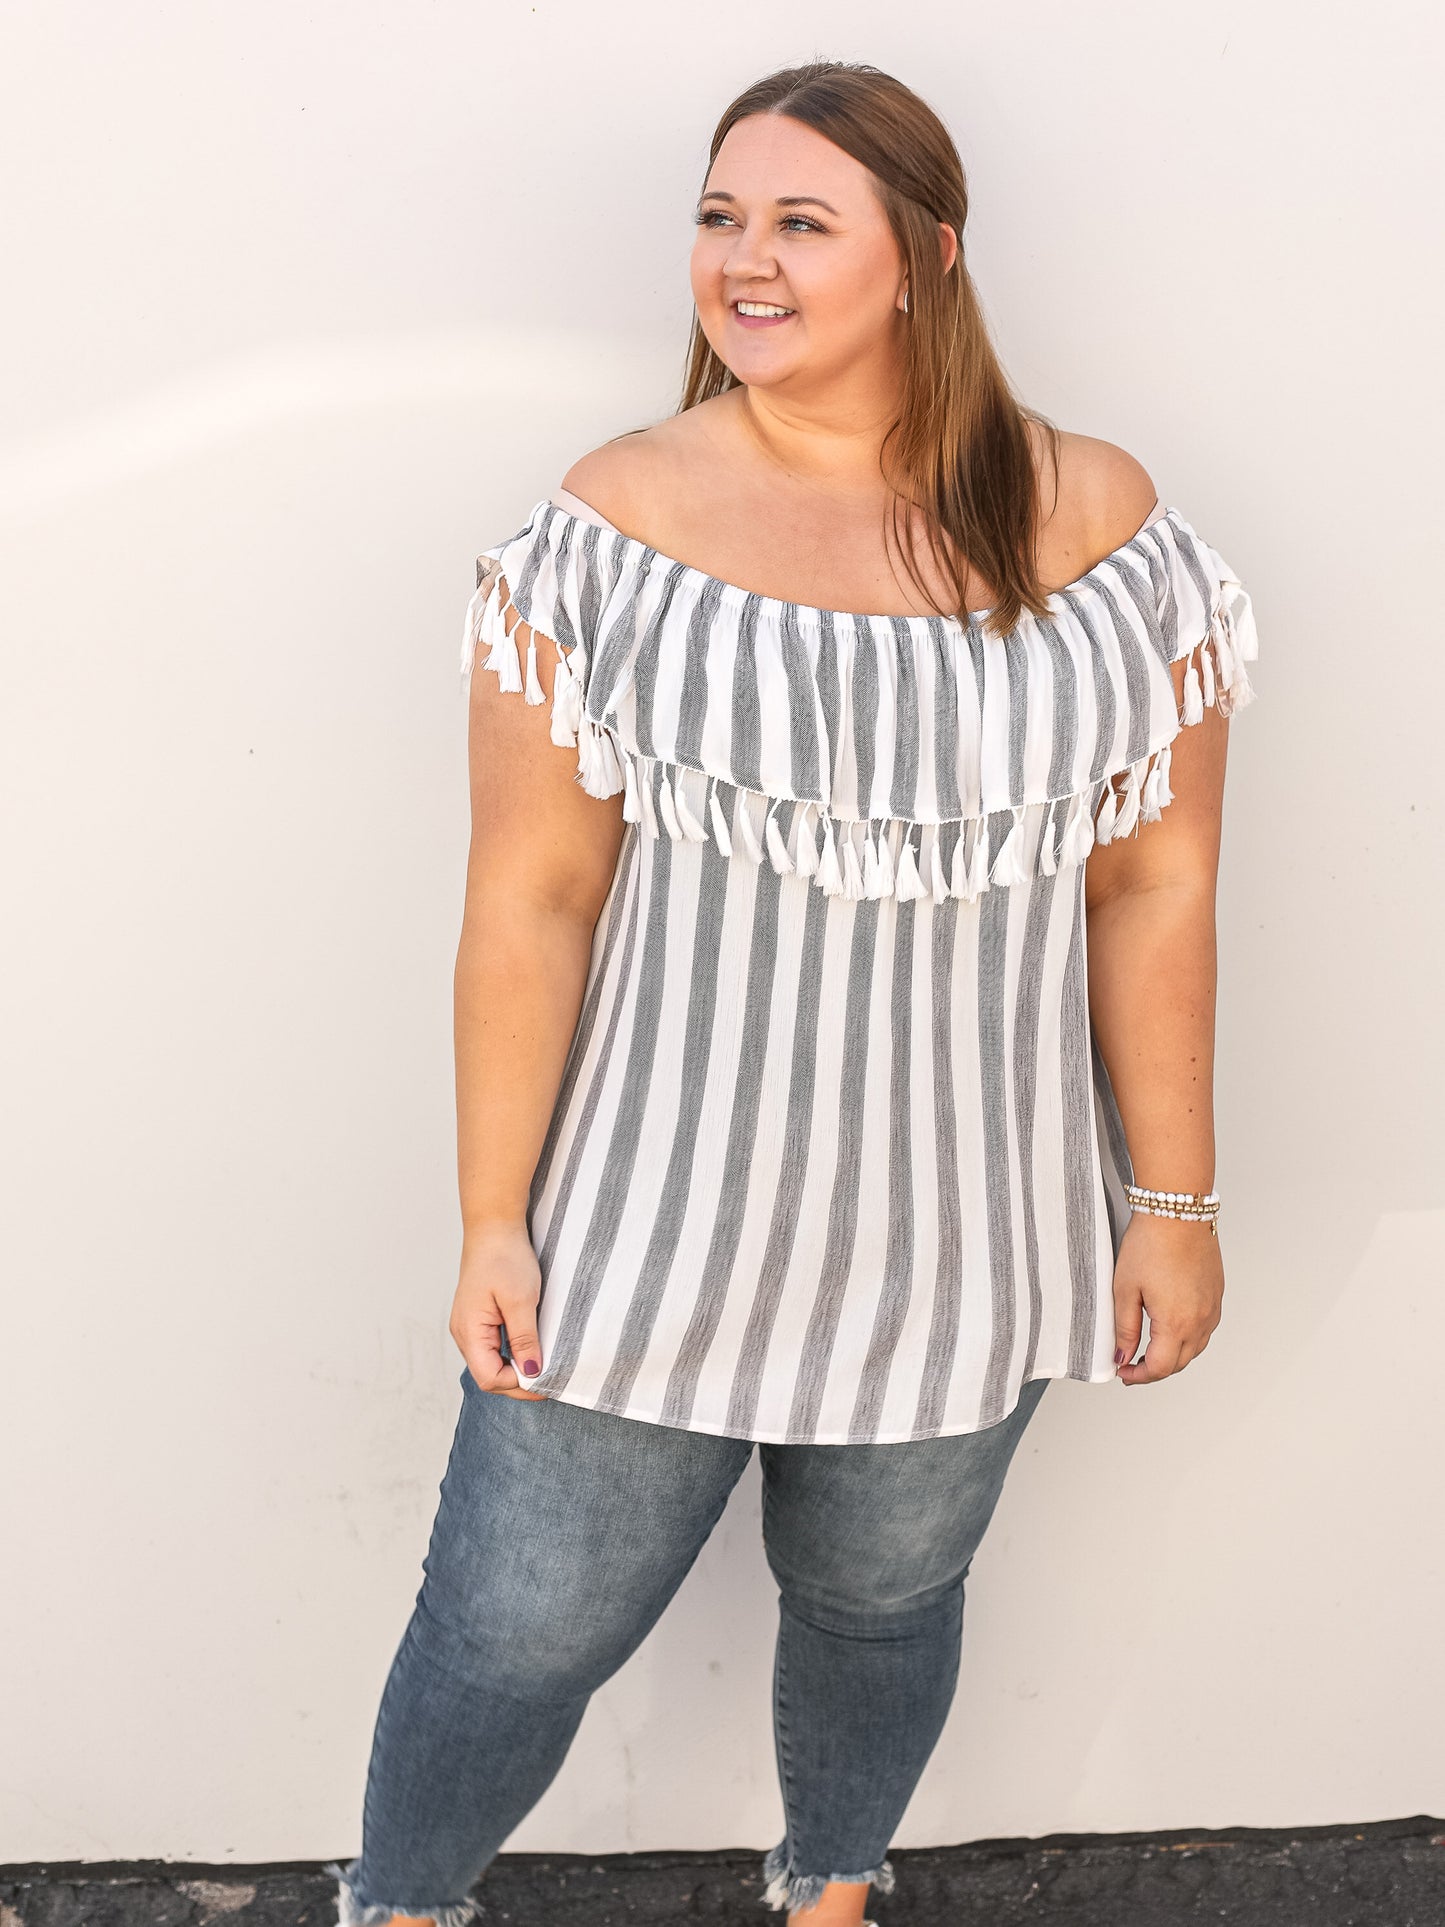 Off the shoulder white and grey striped blouse